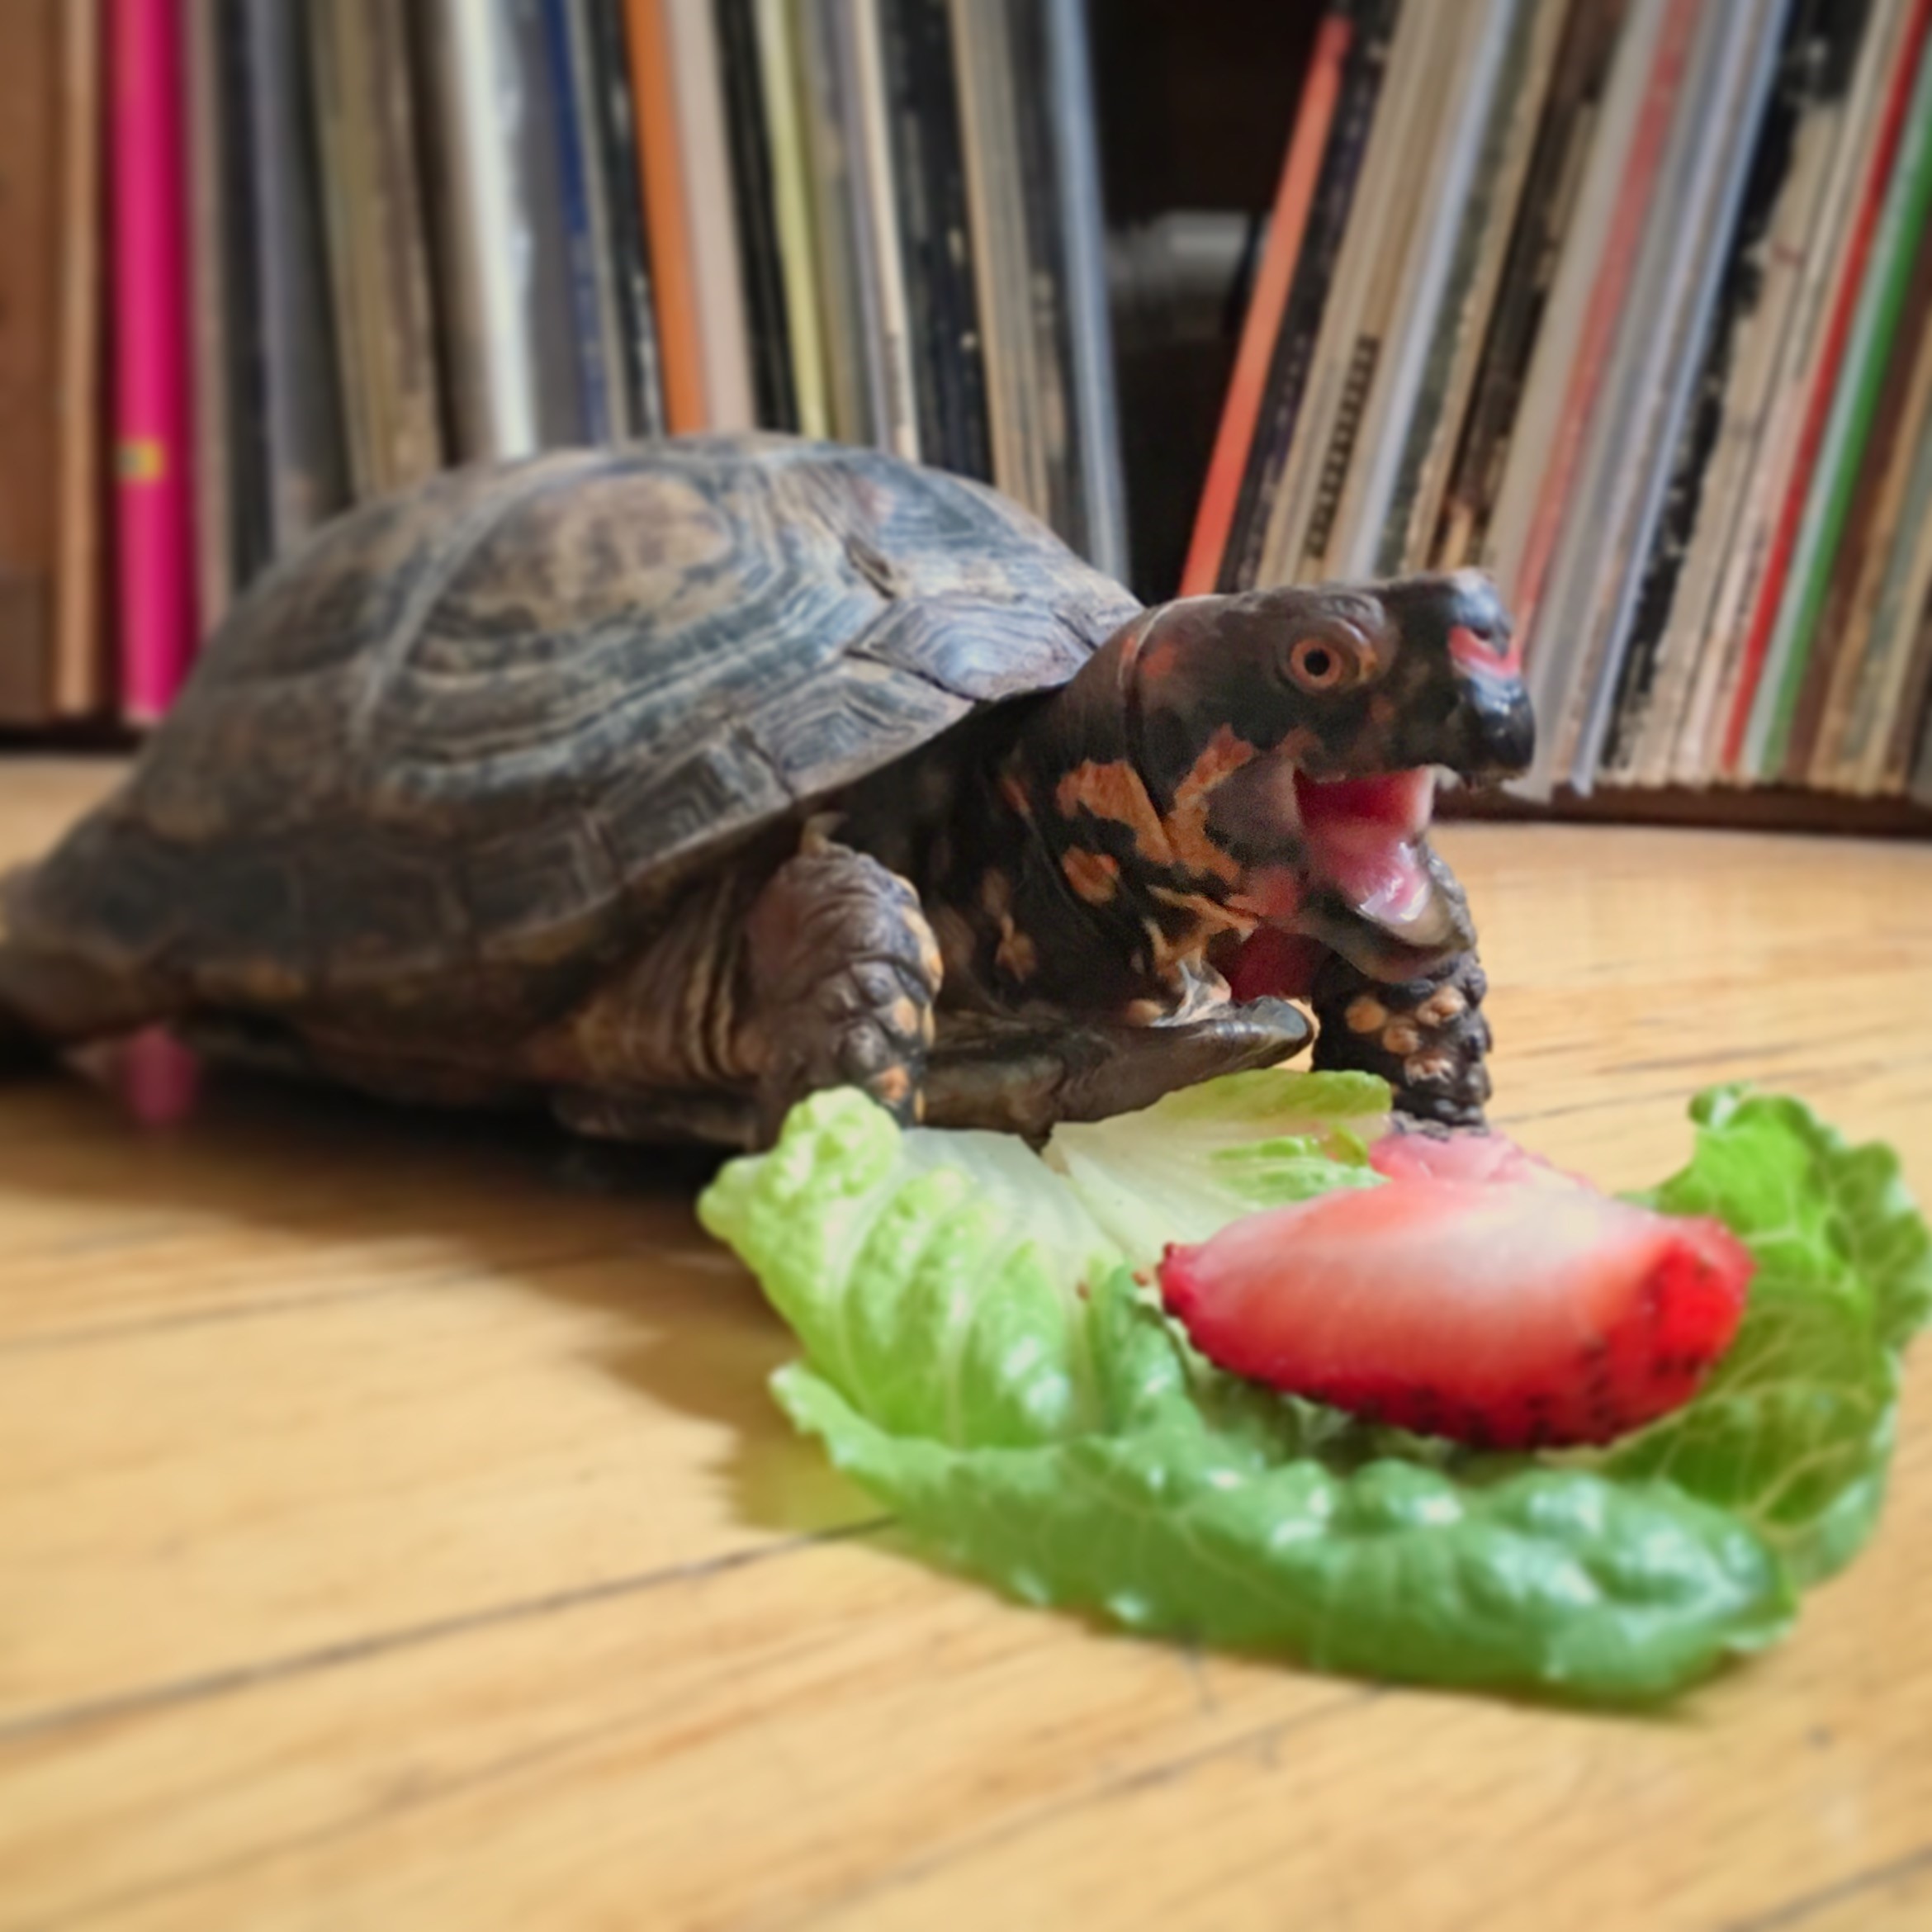 Turtle crawls on wood floor with mouth open. Lettuce and strawberry slice in front of turtle. 